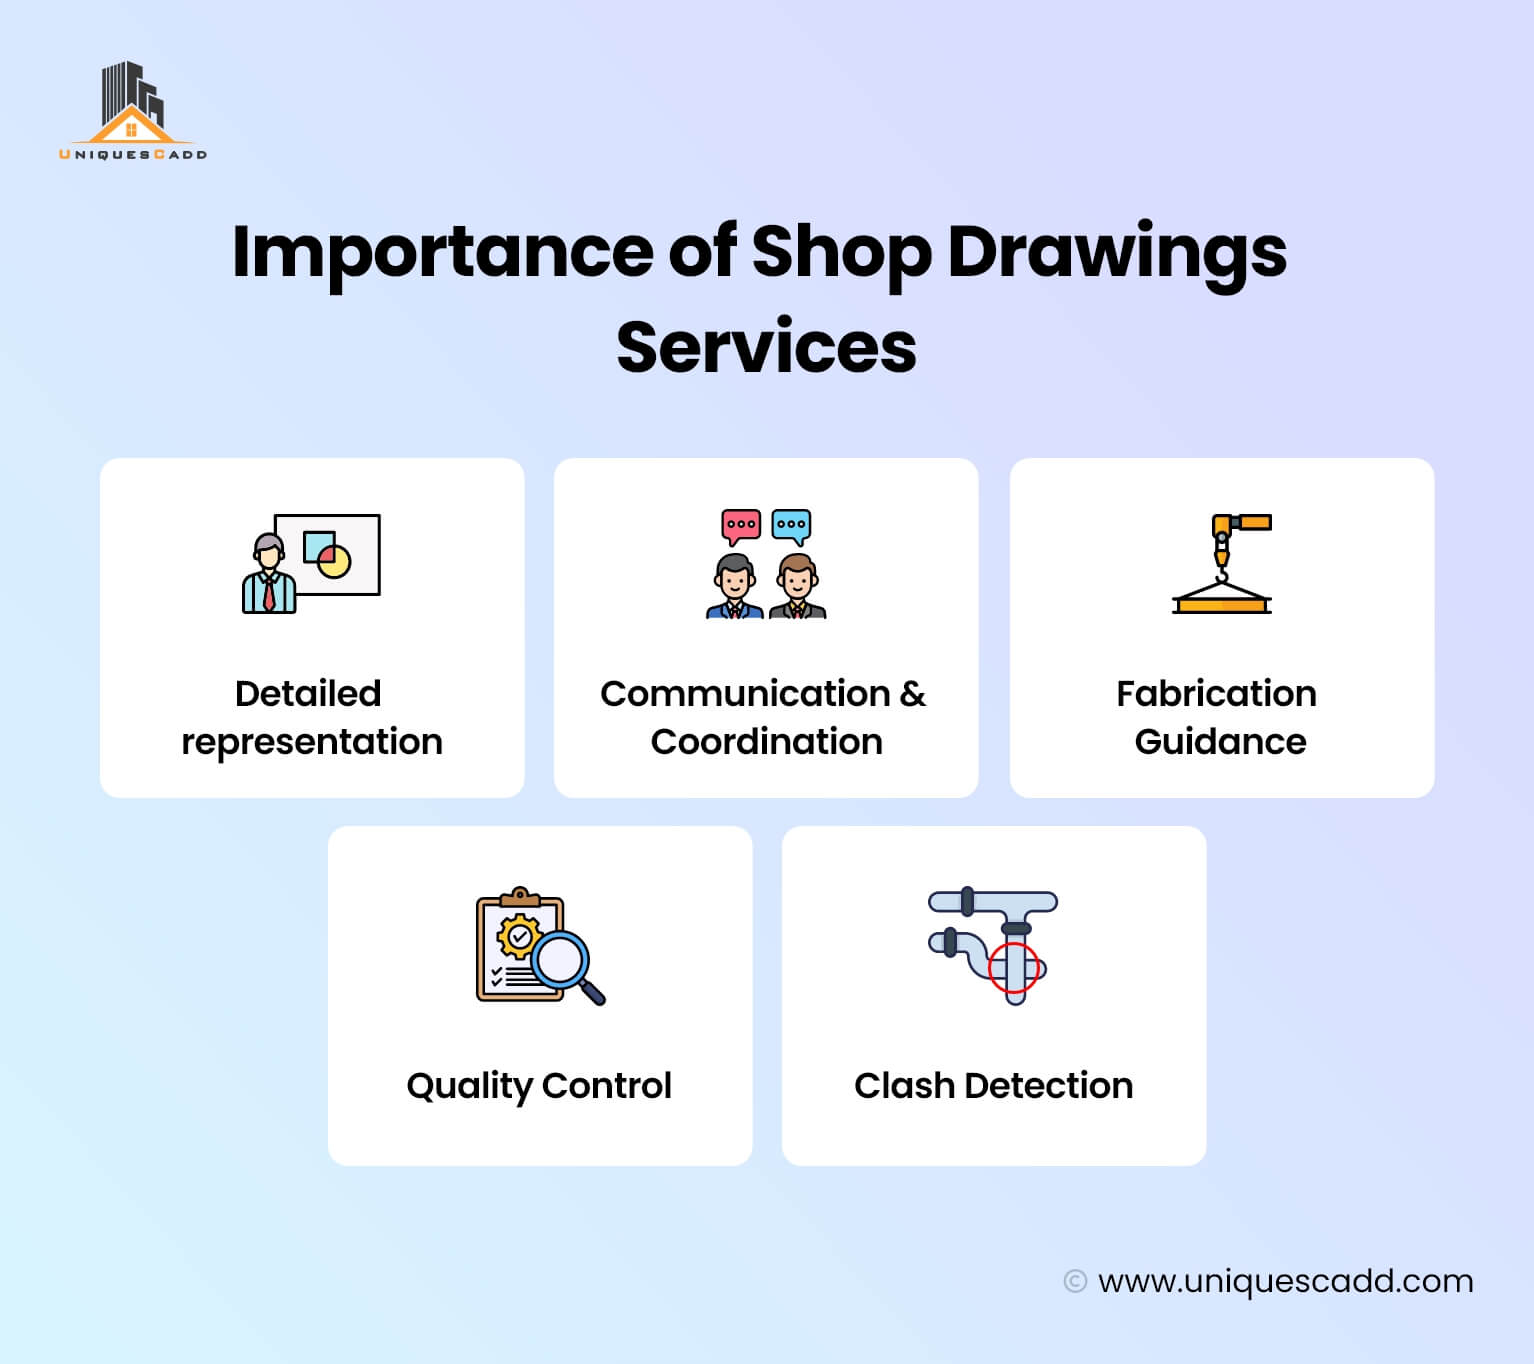 Importance of Shop Drawings Services